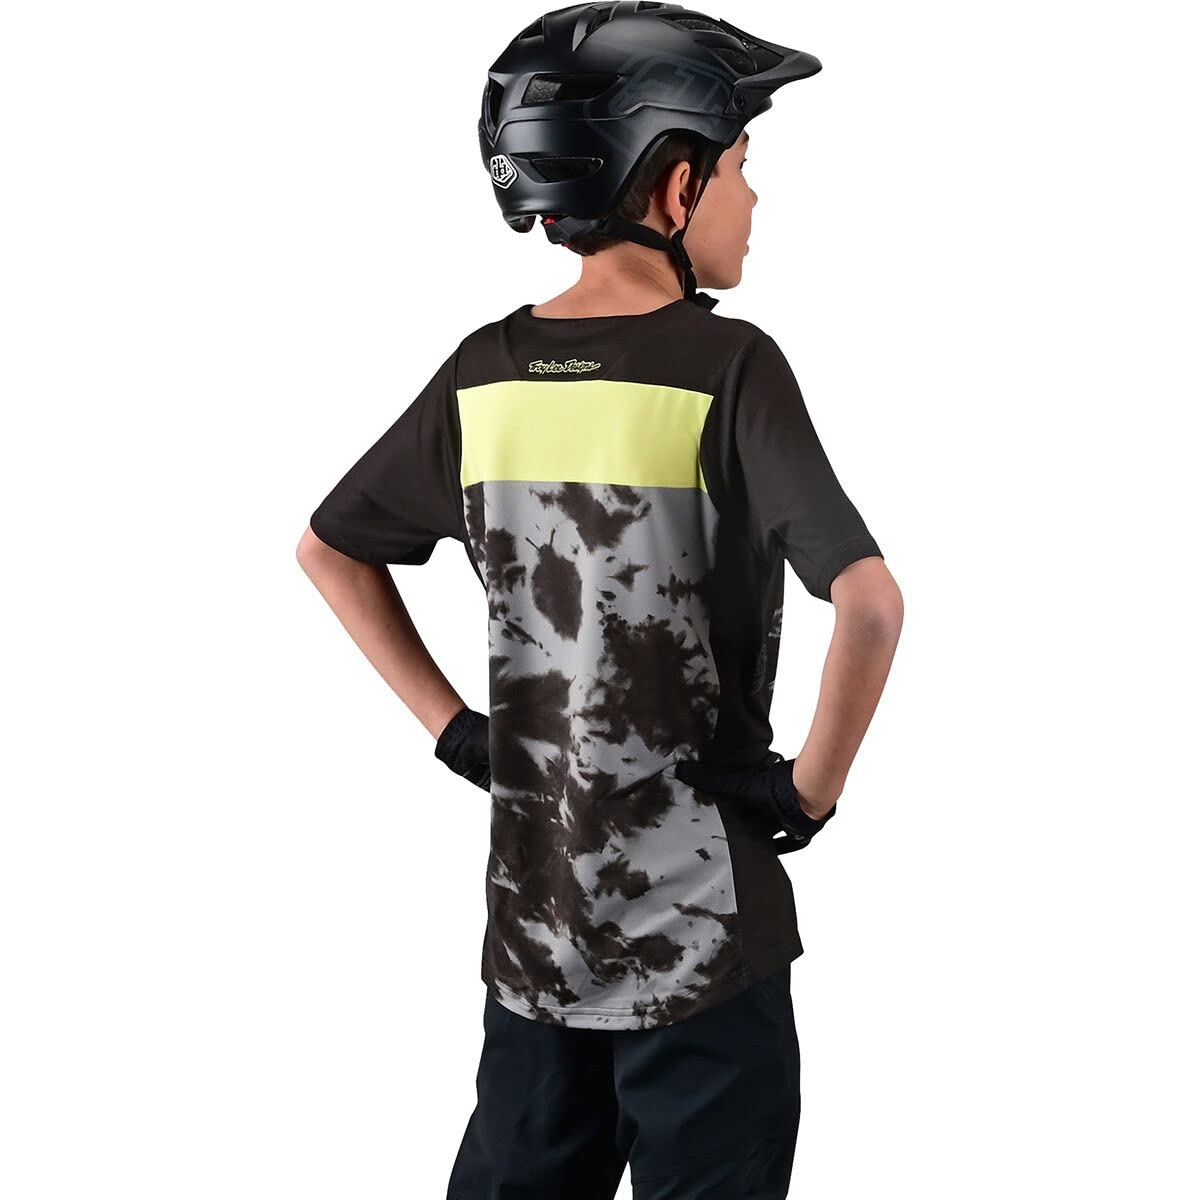 Troy Lee Designs MTB Jersey, Youth 1